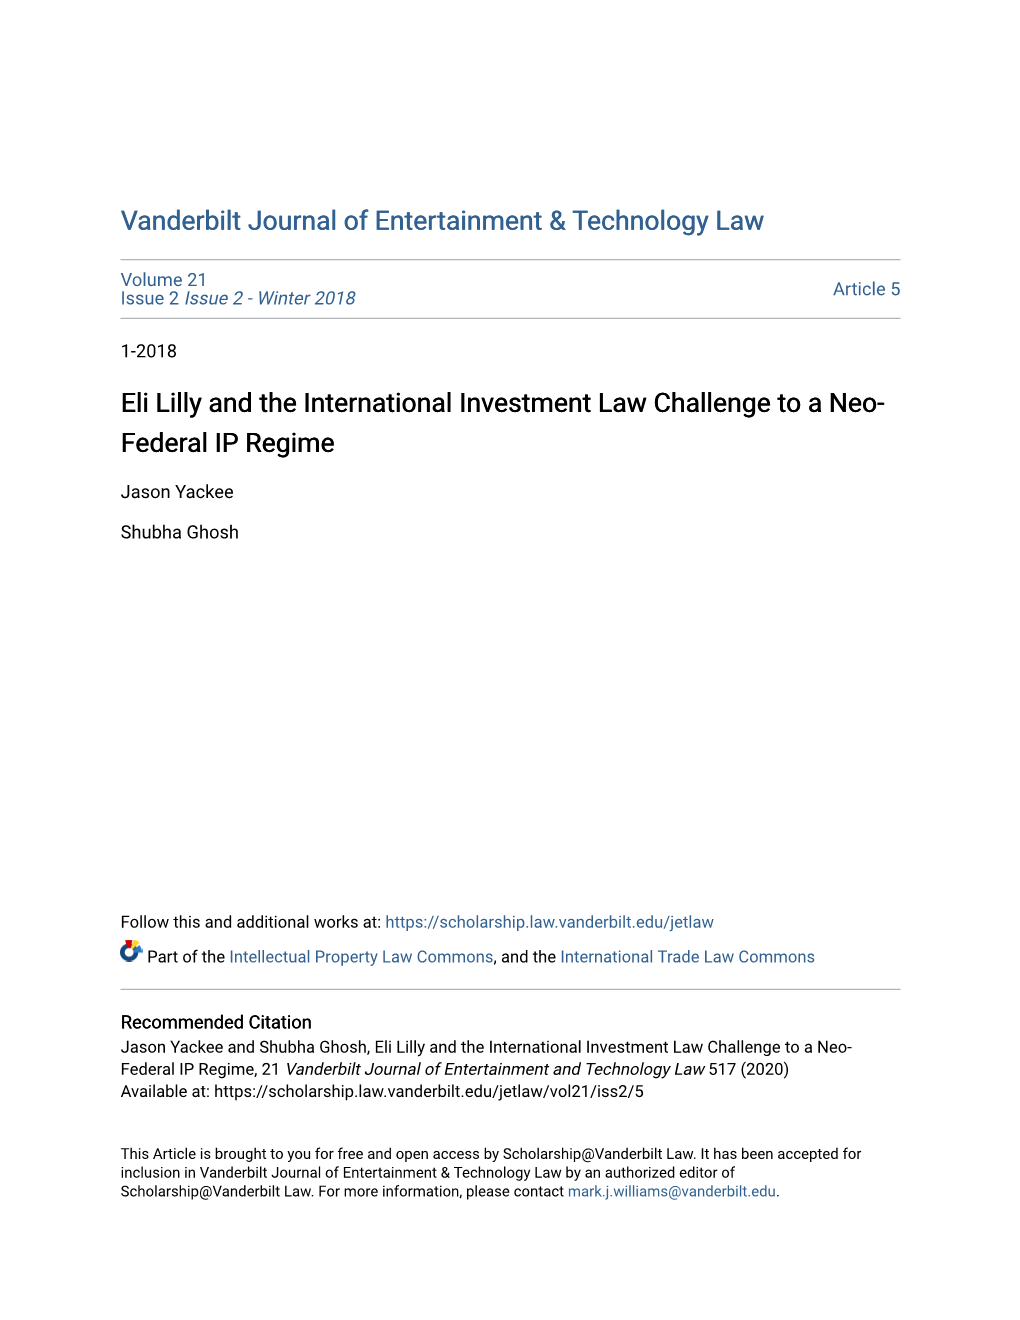 Eli Lilly and the International Investment Law Challenge to a Neo- Federal IP Regime